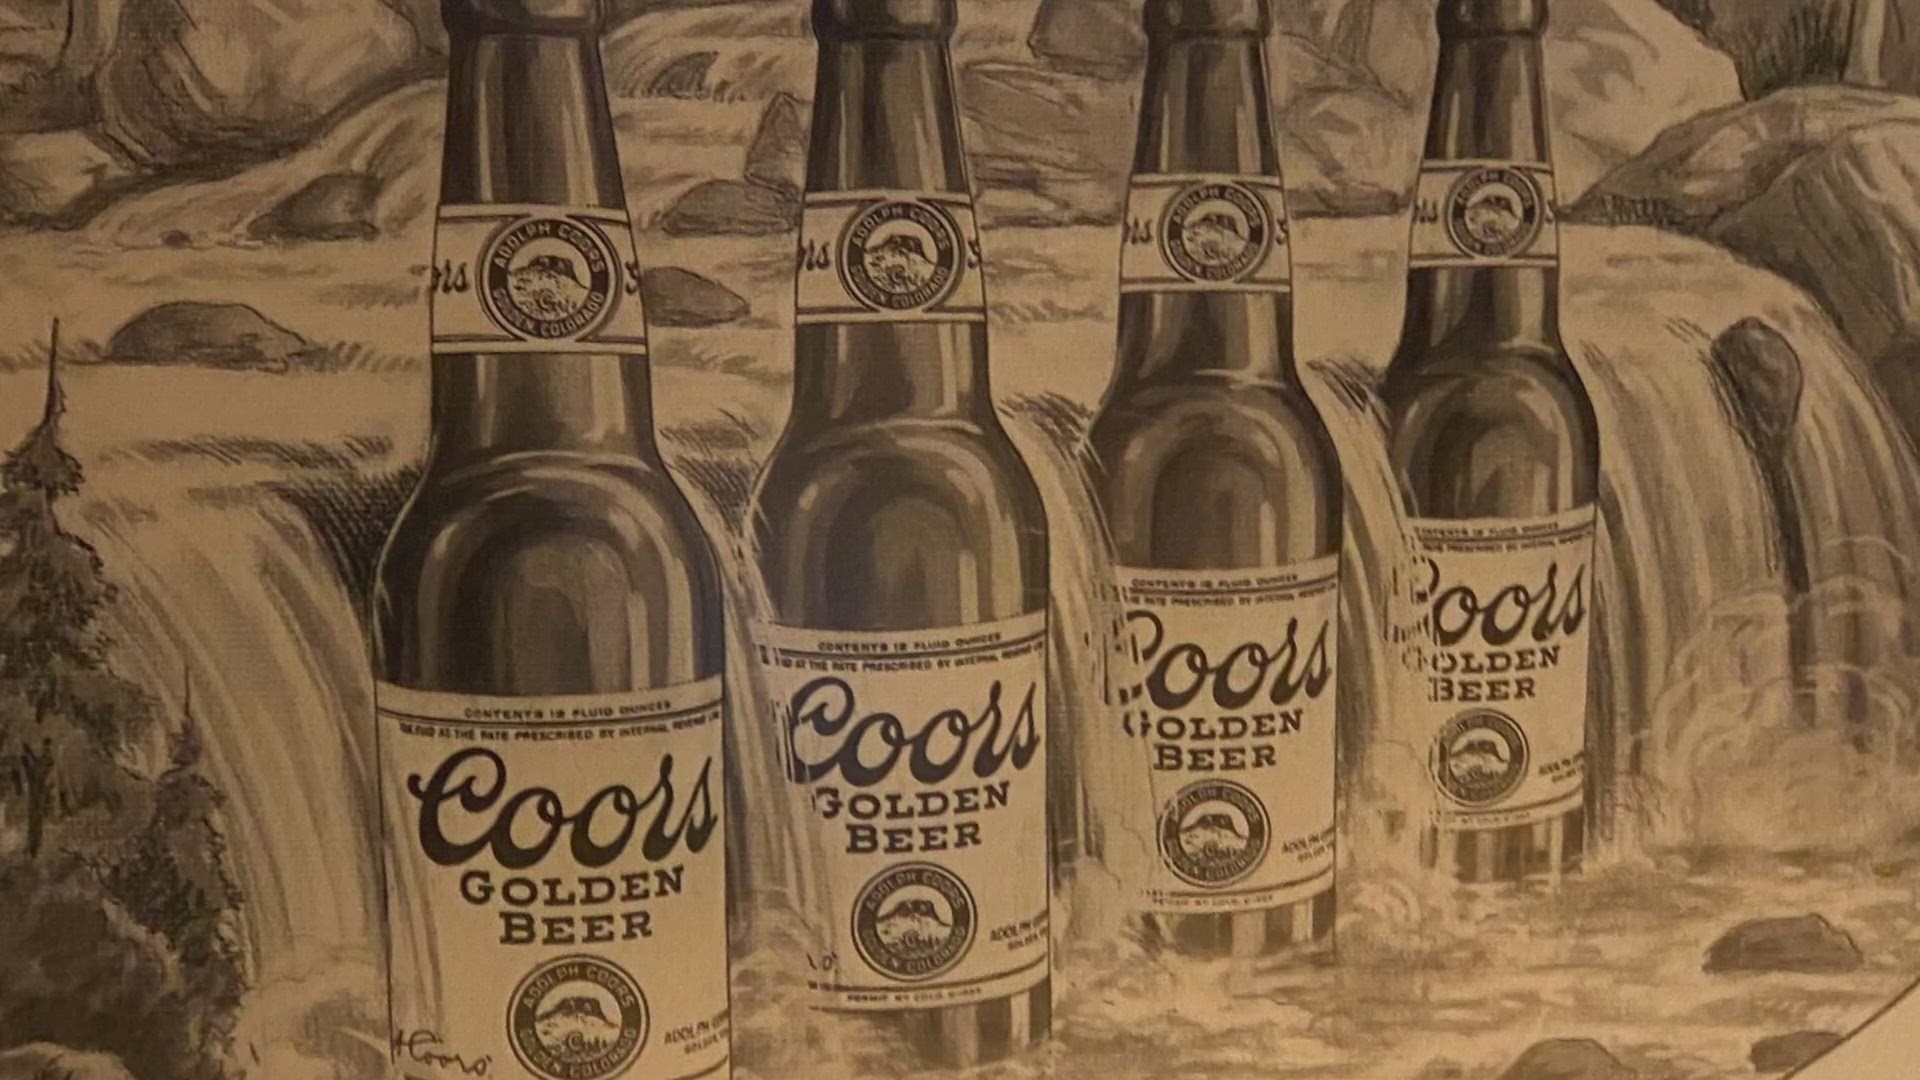 As Coors celebrates its 150th anniversary in Golden, we take a look back at how it all began.